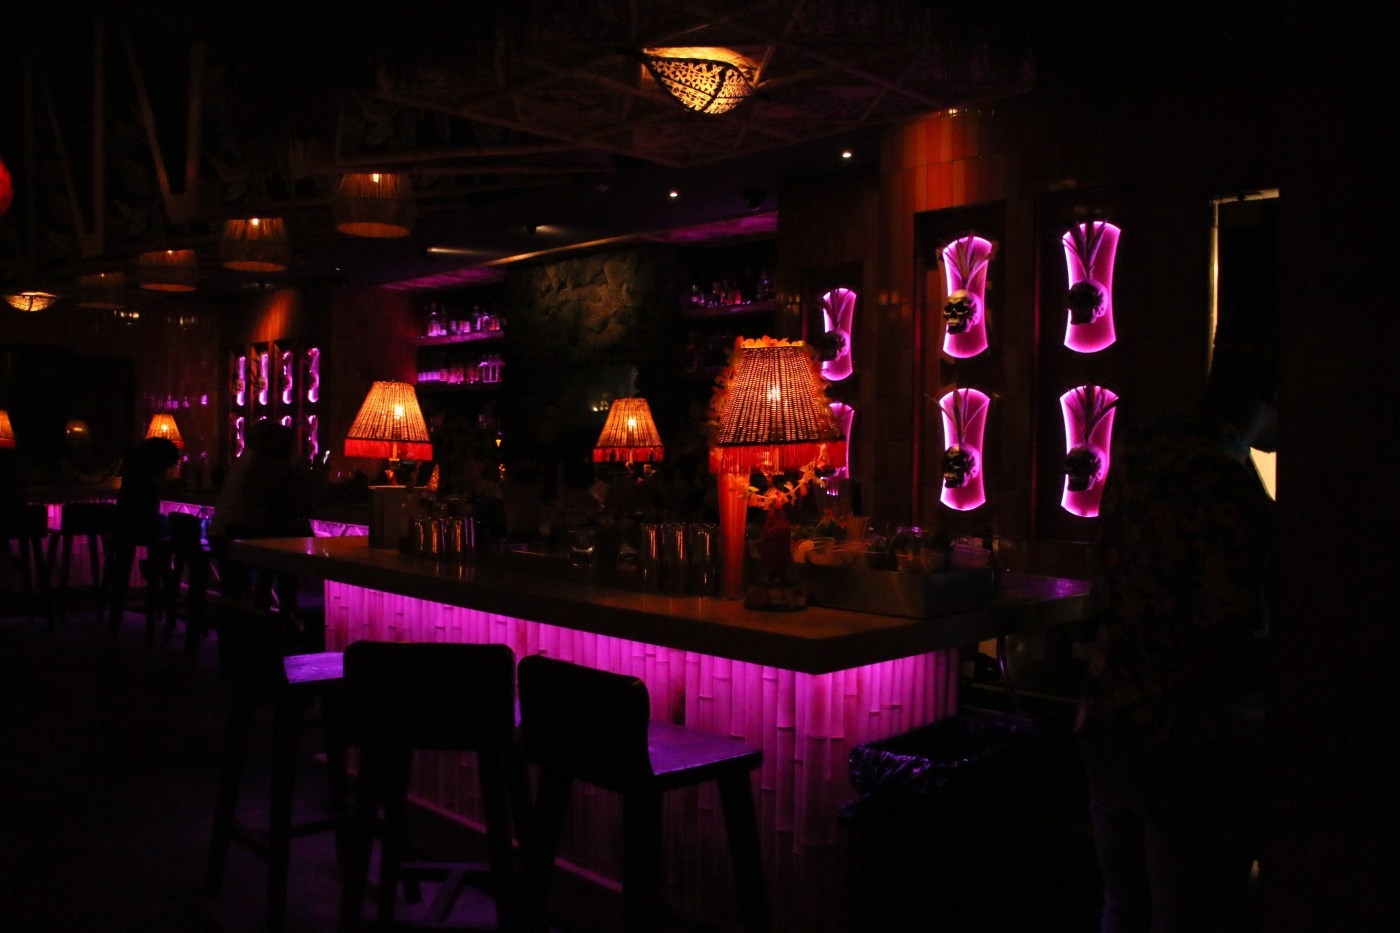 PB has caught onto the secret bar trend with their very own tik-inspired speakeasy. Enter through a freezer in a Poké bar to this tropical wonderland!